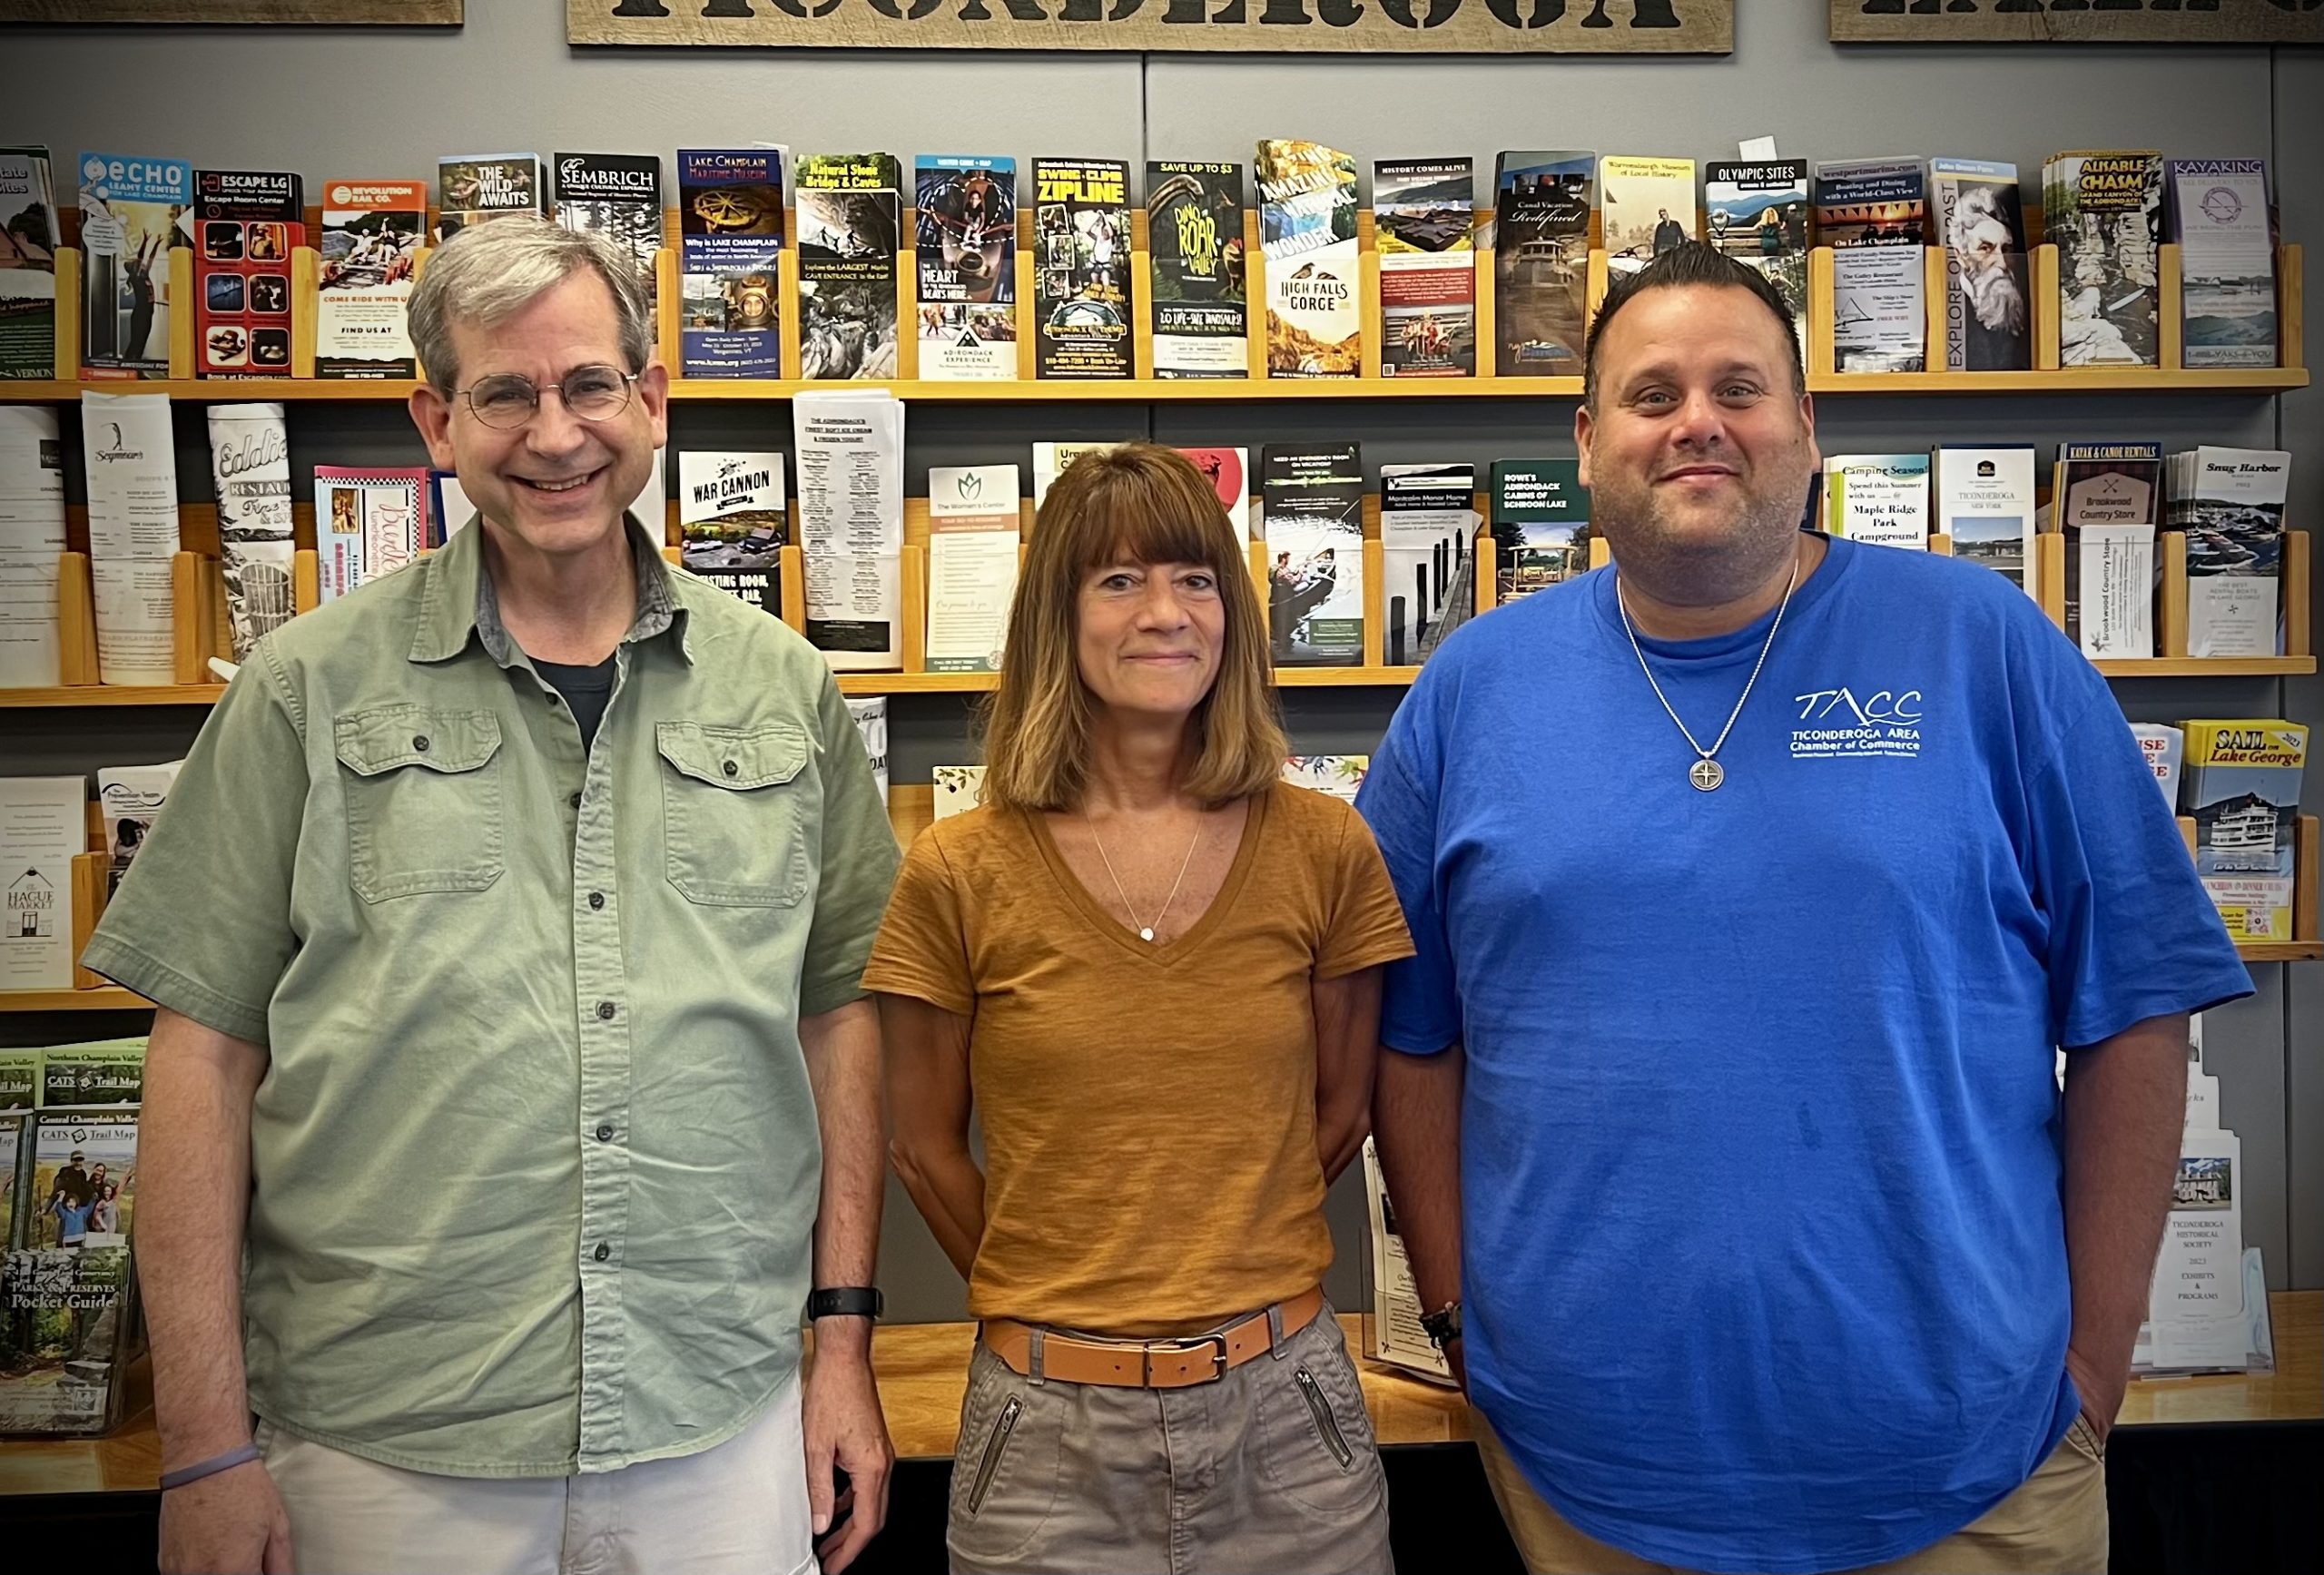 Pictured from left to right is Supervisor Mark Wright (Town of Ticonderoga), Carol Calabrese (ECIDA), and Matthew Courtright (TACC).